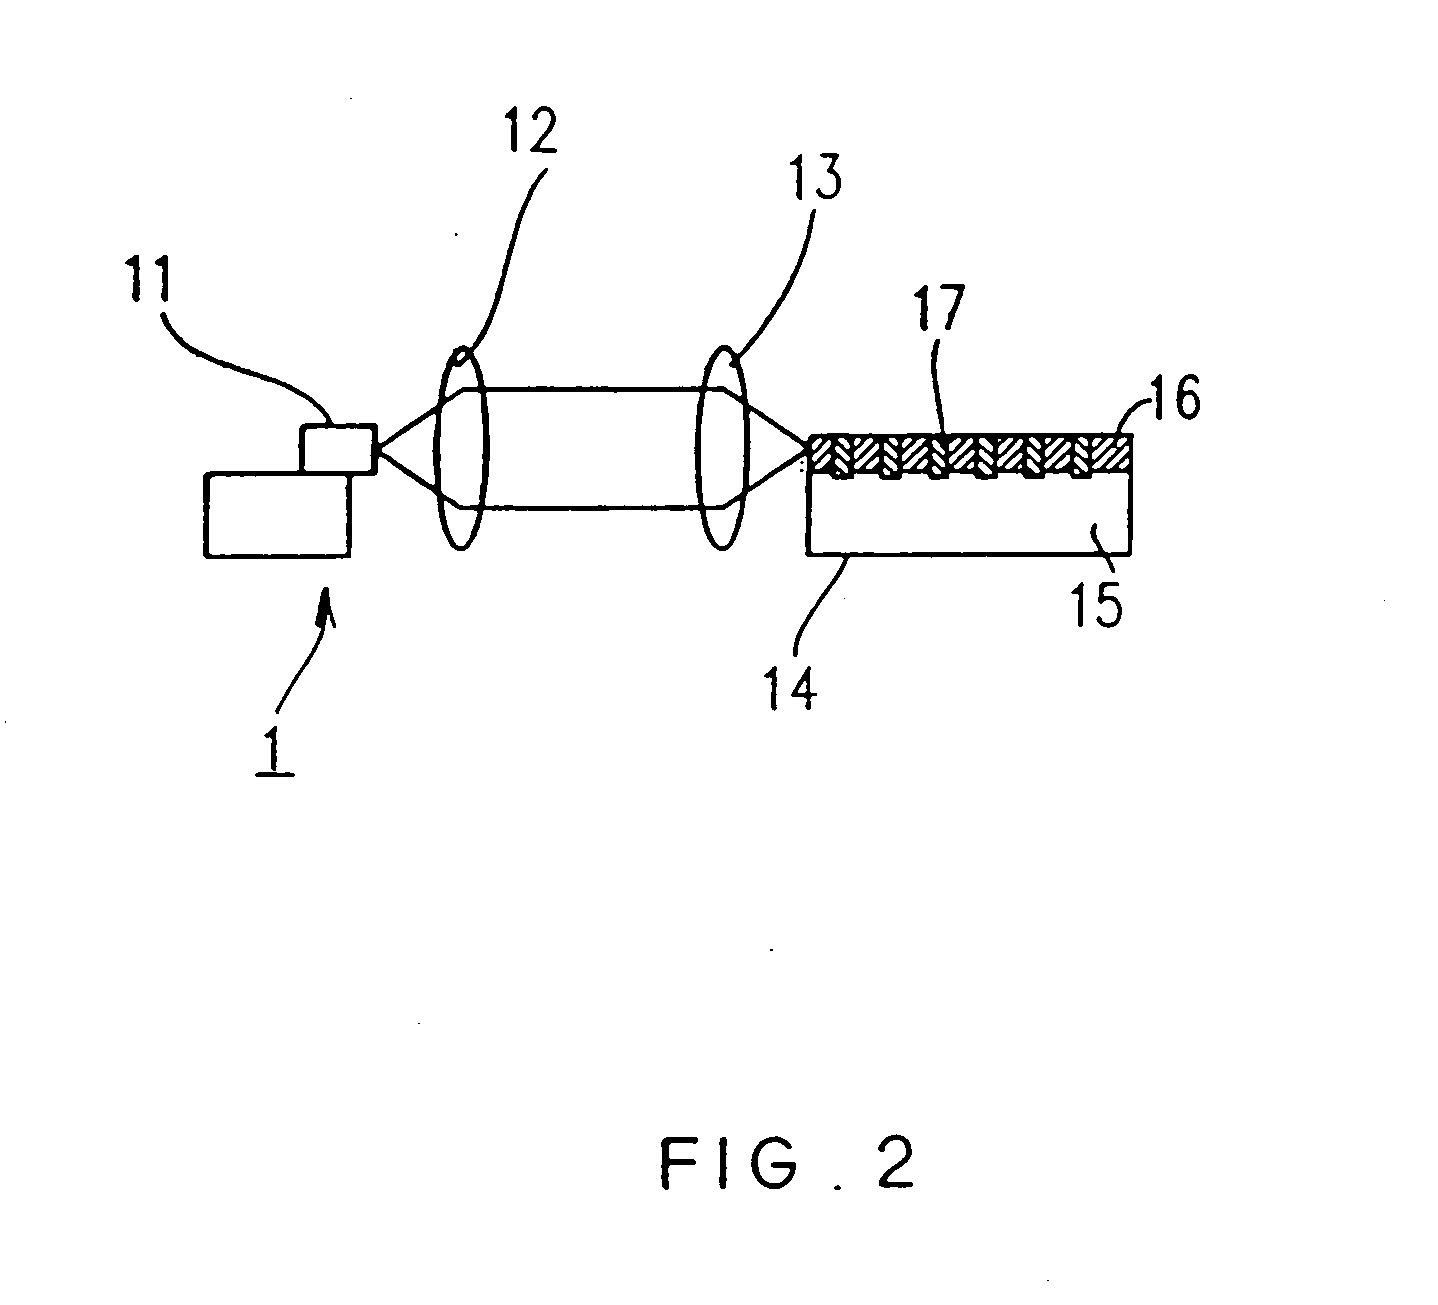 Optical pickup, optical information recording/reproducing apparatus using the same, and phase variable wave plate used in the pickup and the apparatus